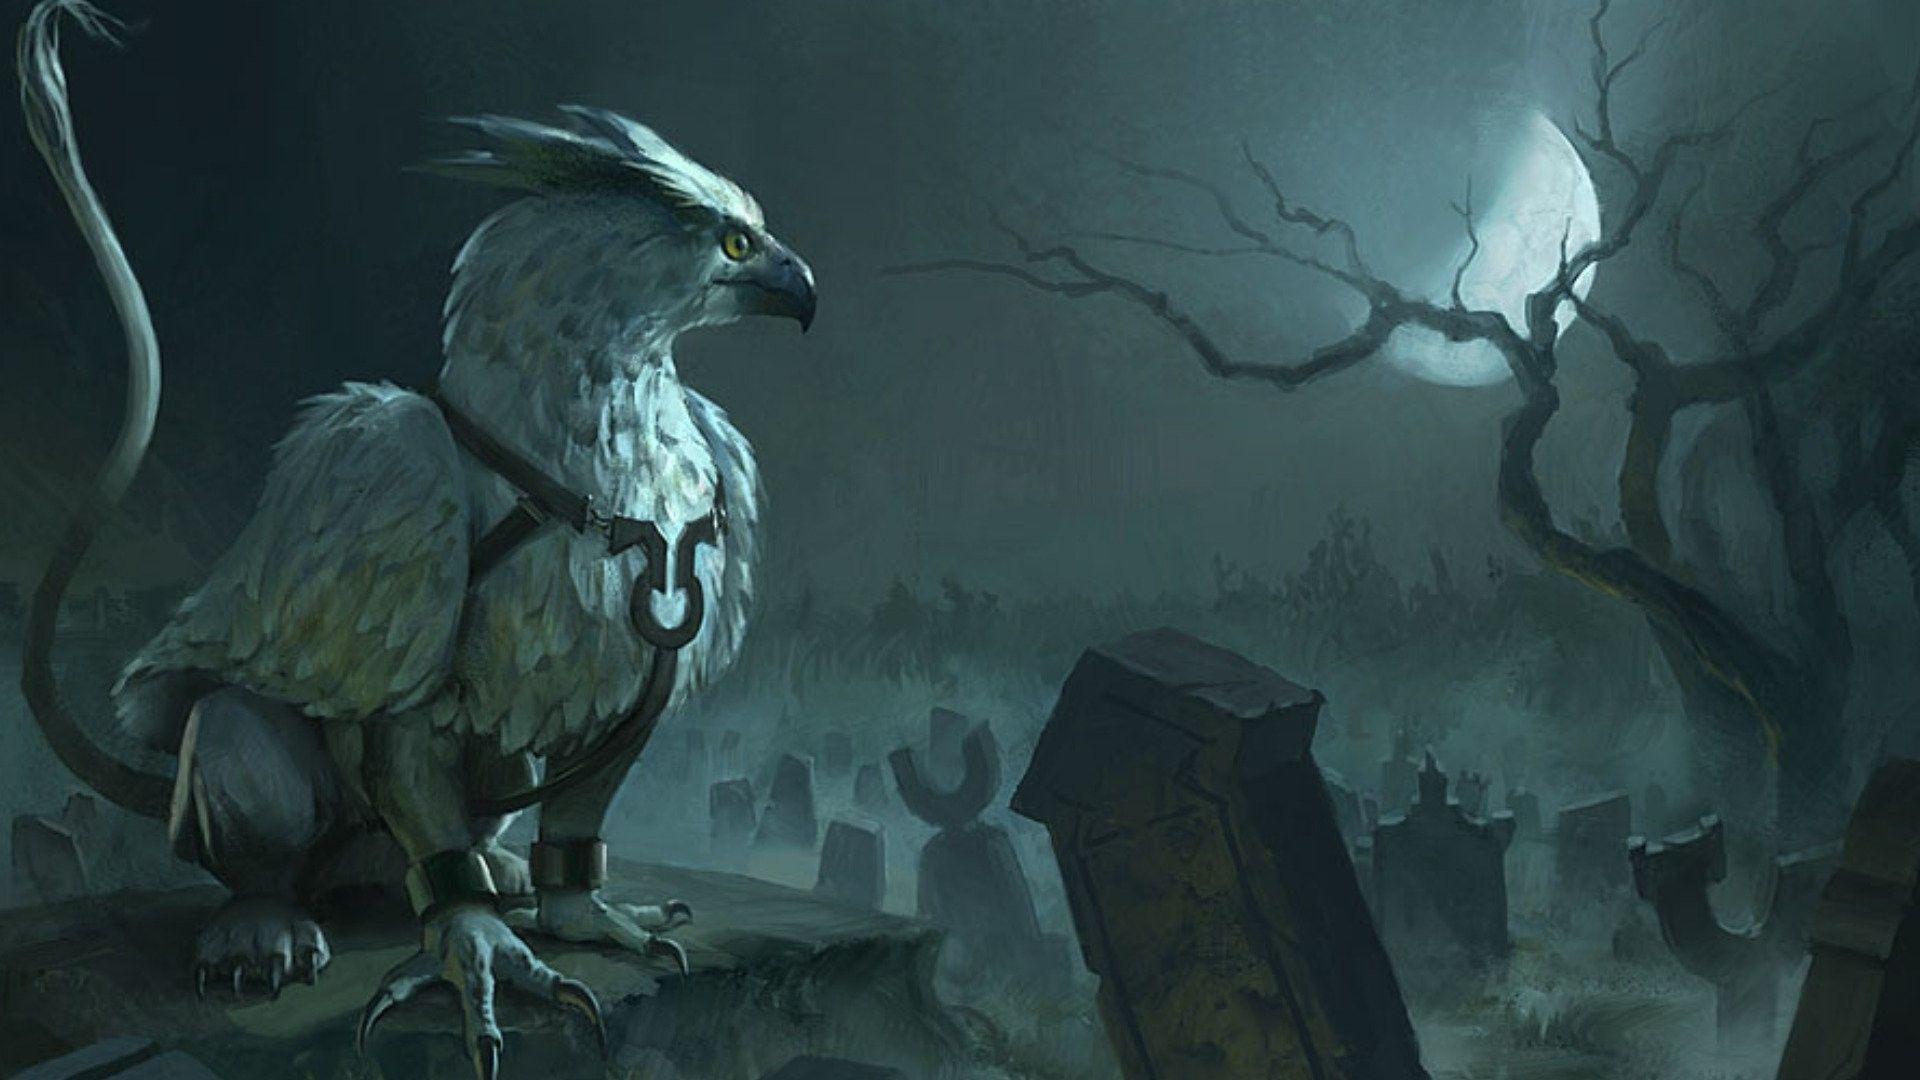 Cool Mythical Creatures Backgrounds